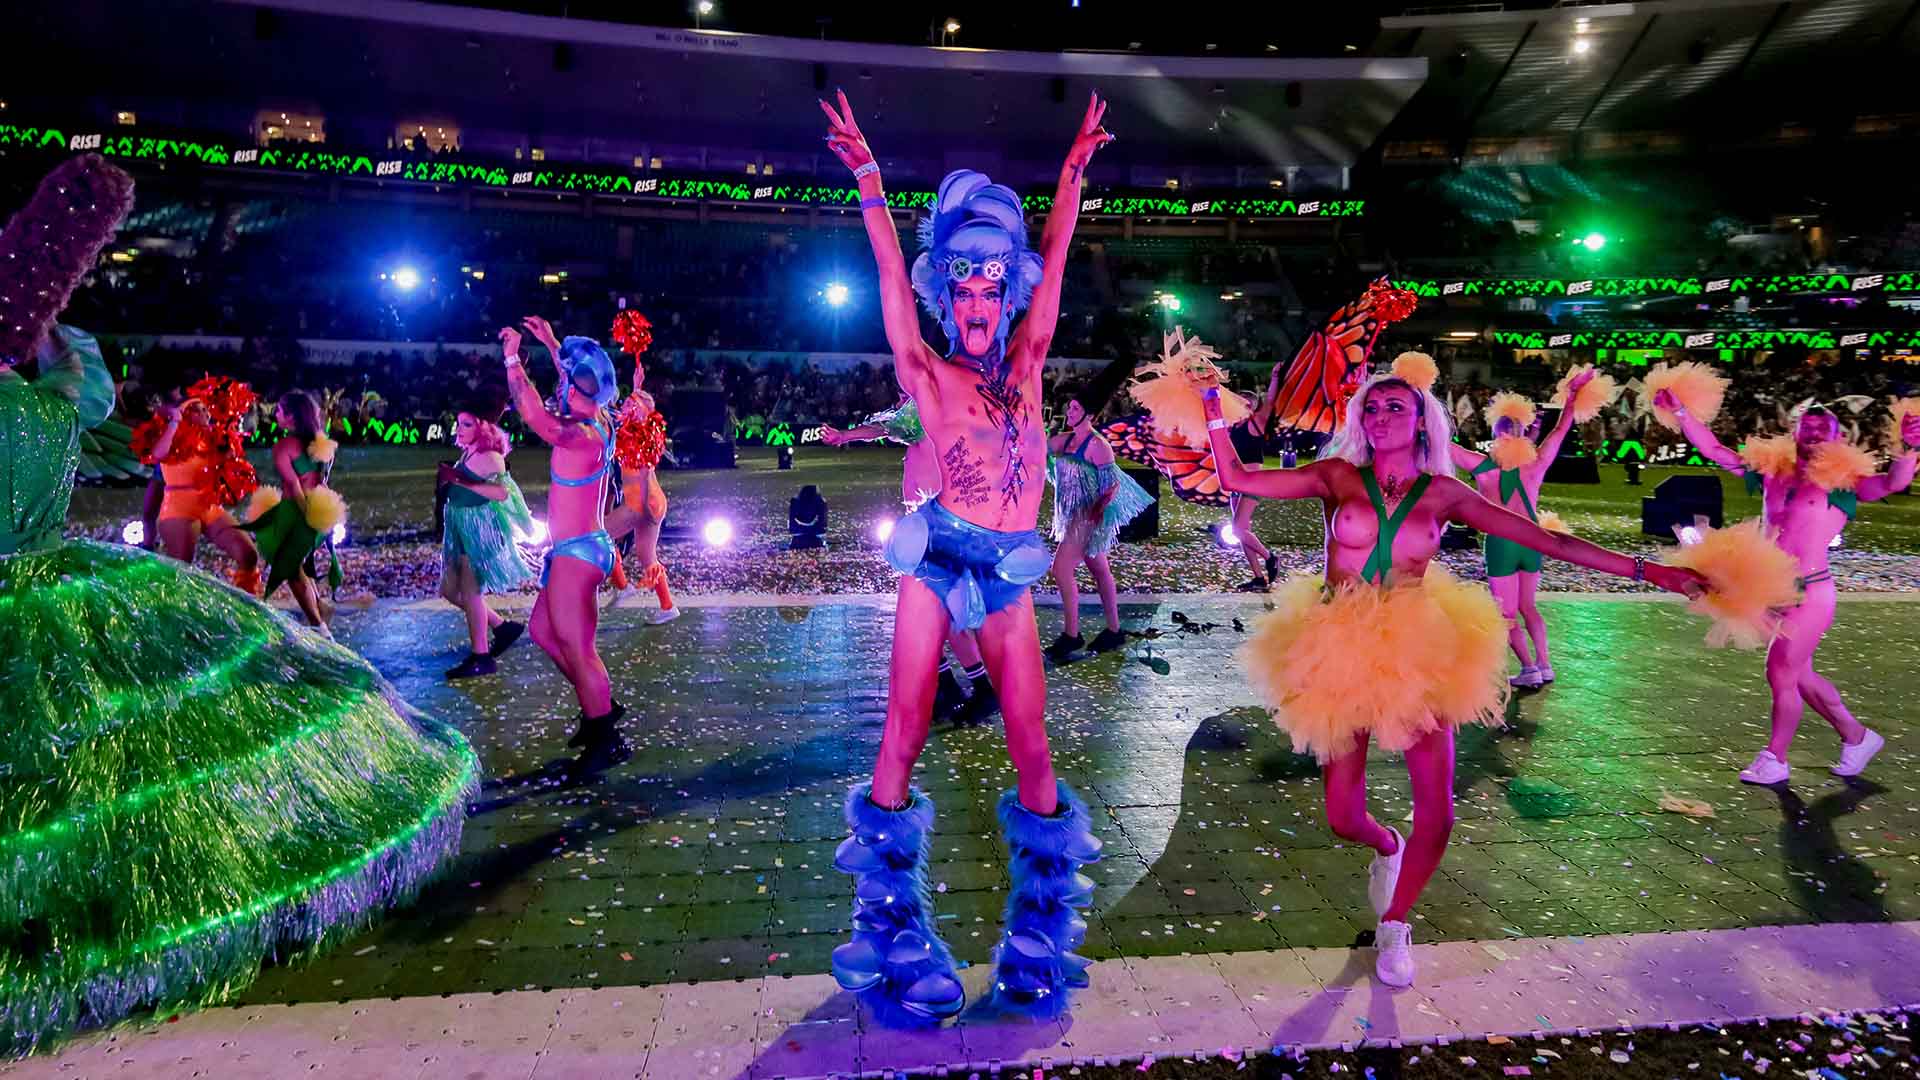 Need Last-Minute Mardi Gras Inspiration? Here Are Sydney's Top Events and Happenings That Aren't The Parade